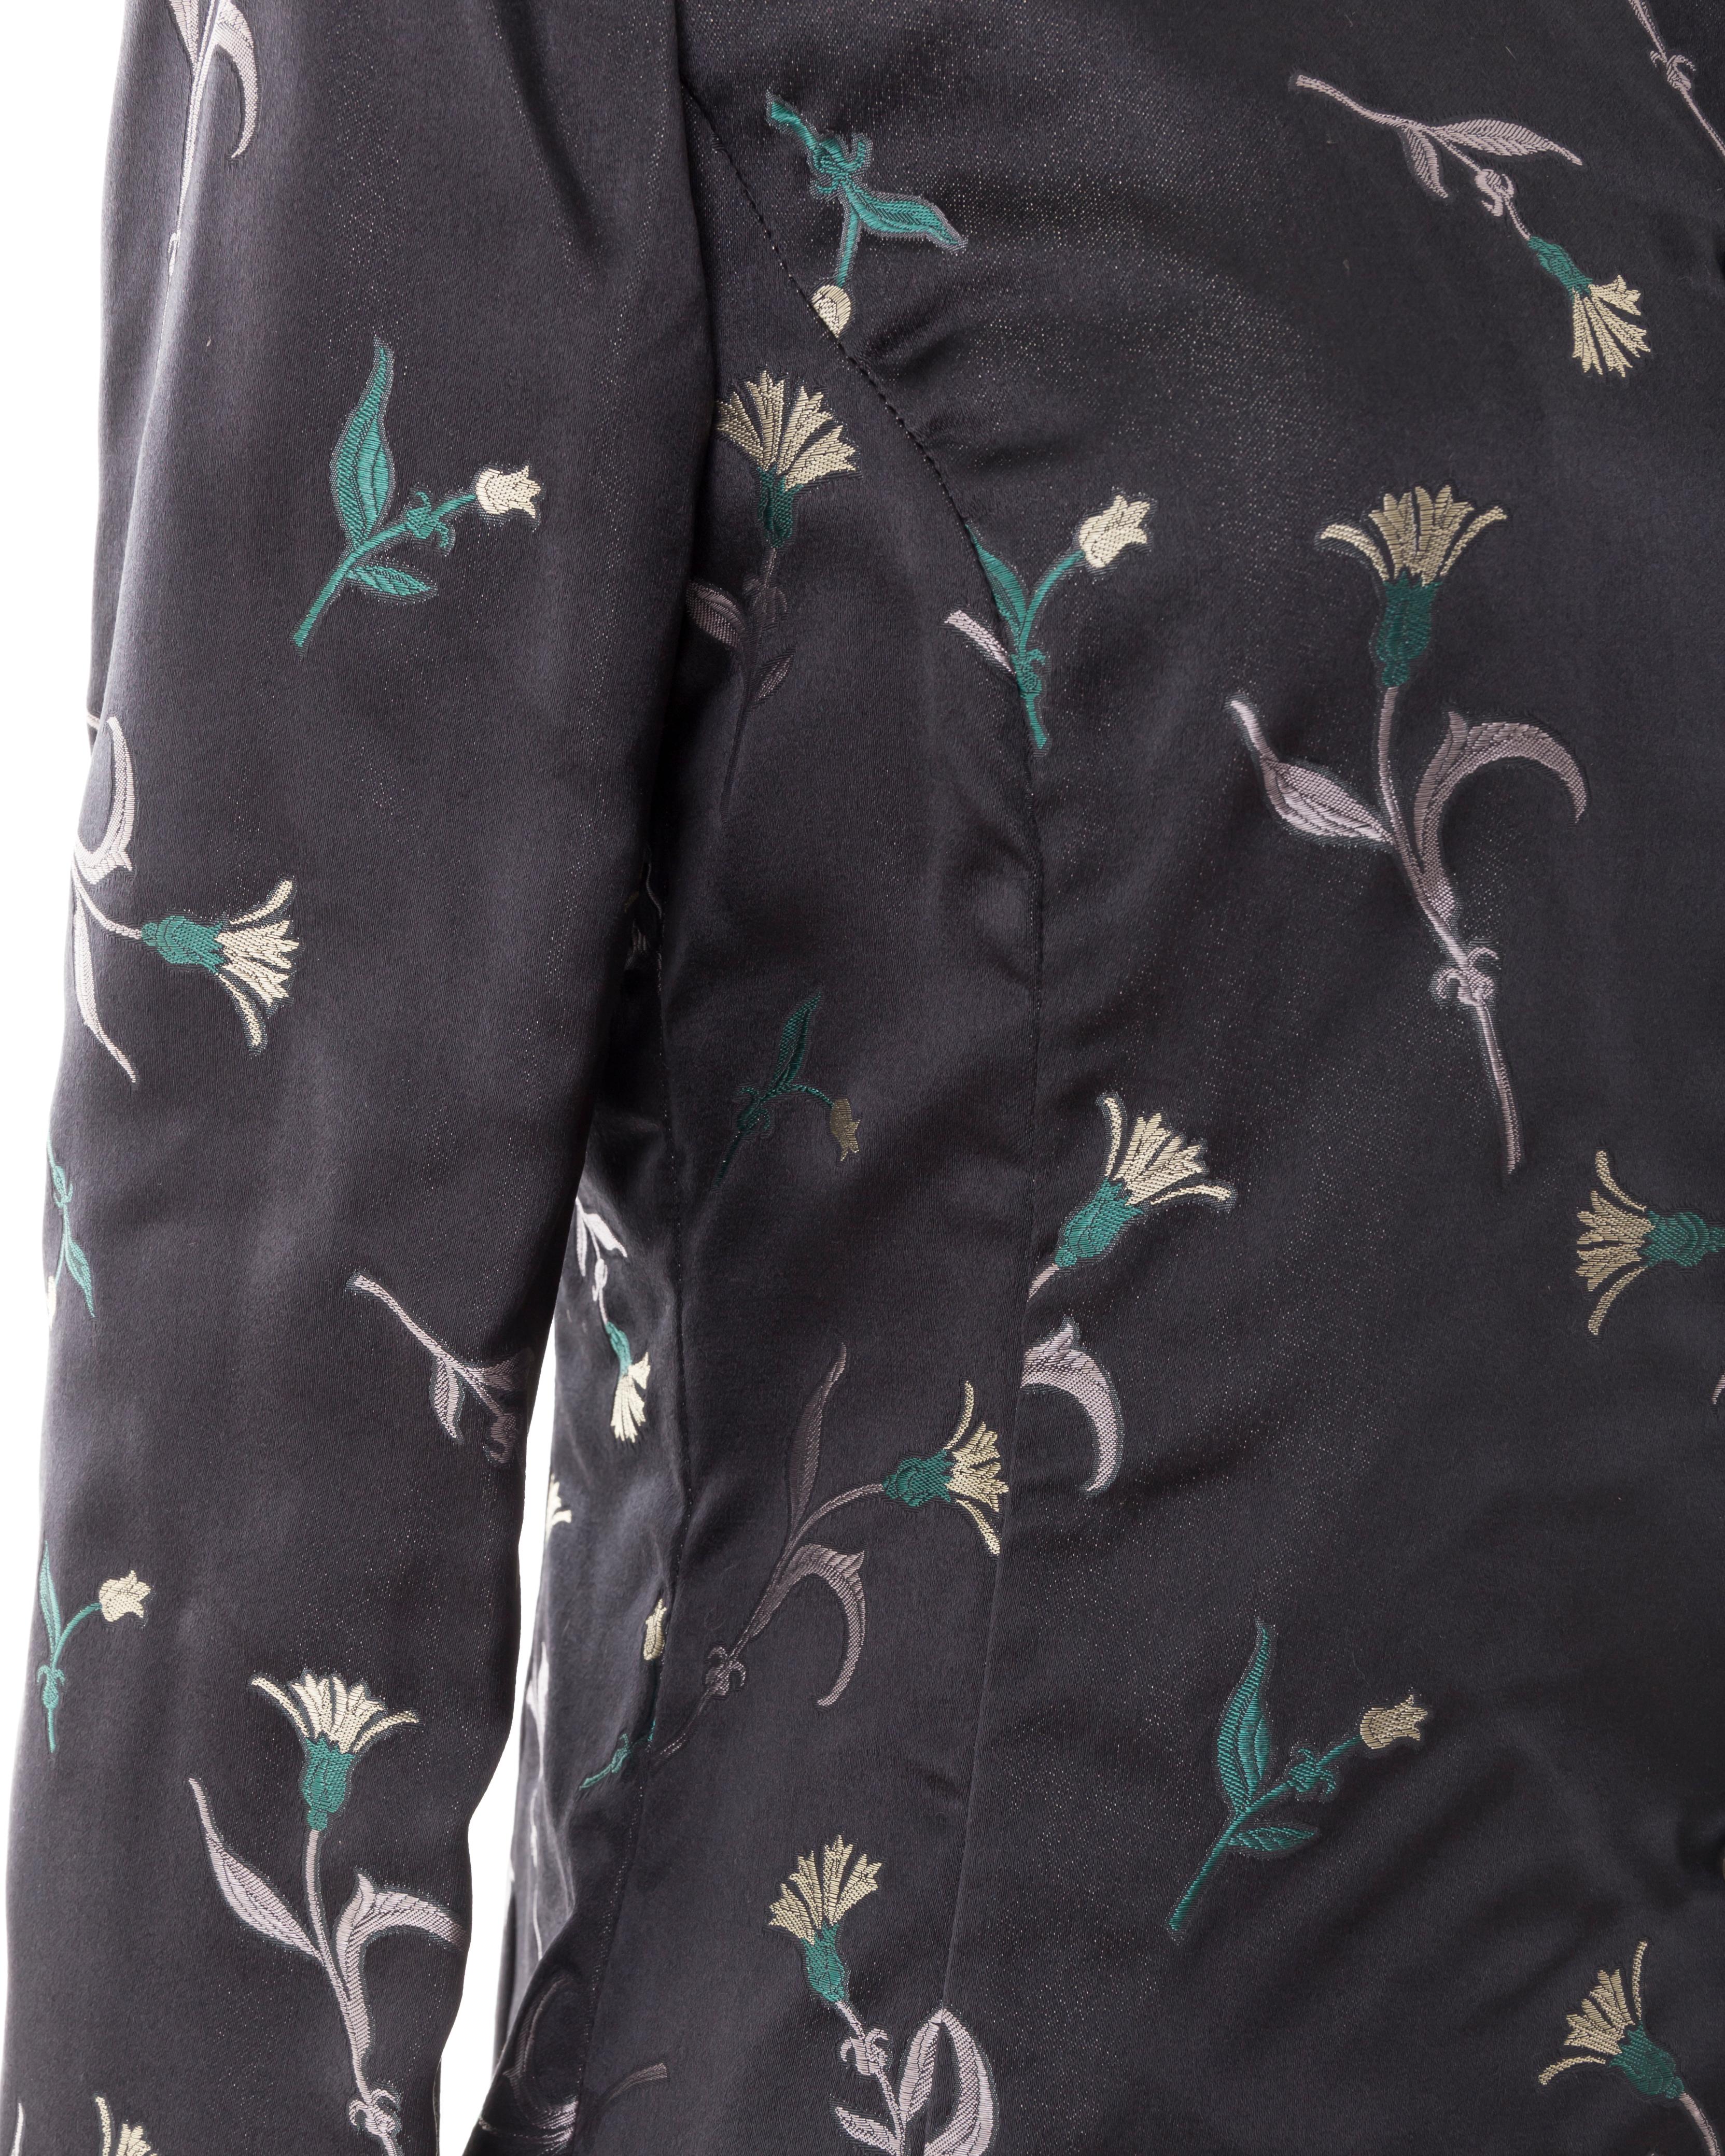 Prada F/W 1997 black floral mandarin collar shirt In Excellent Condition For Sale In Rome, IT